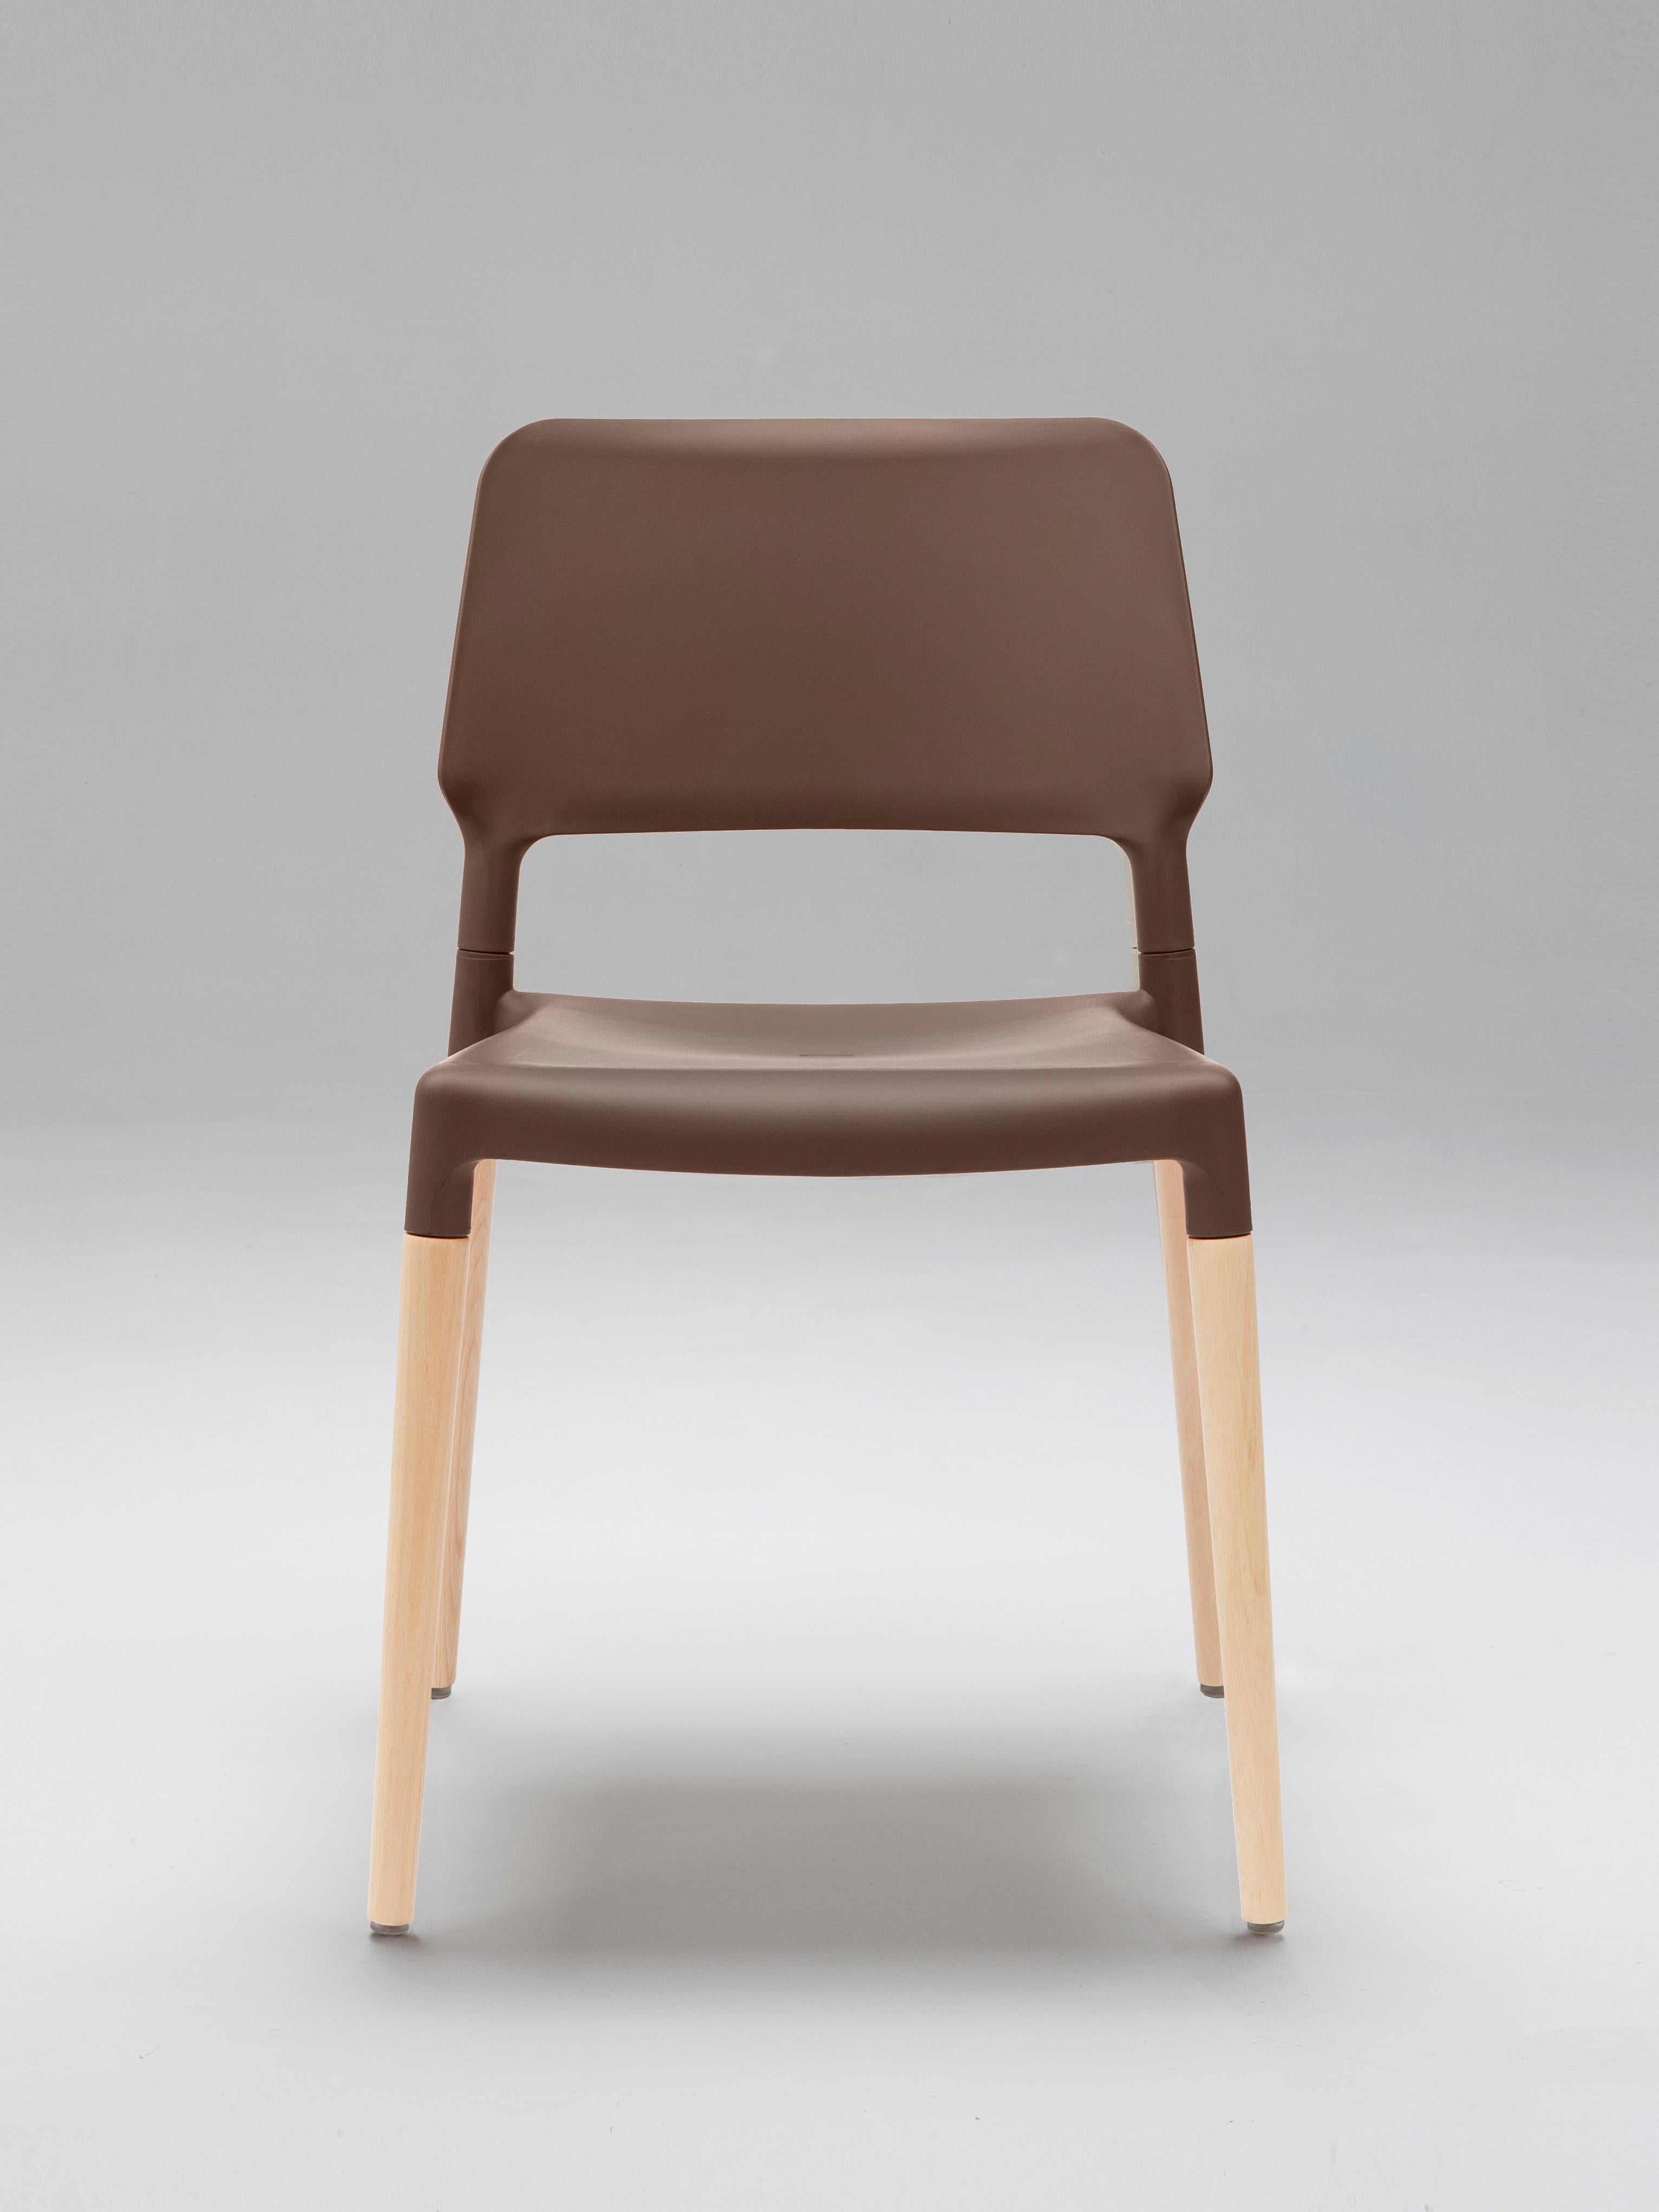 Set of 4 Belloch dining chair by Lagranja Design
Dimensions: D 50 x W 54 x H 79 cm
Materials: beech wood, polypropylene, fiberglass.
Available in other colors.

The Belloch chair is the result of commissioning a lightweight and stackable